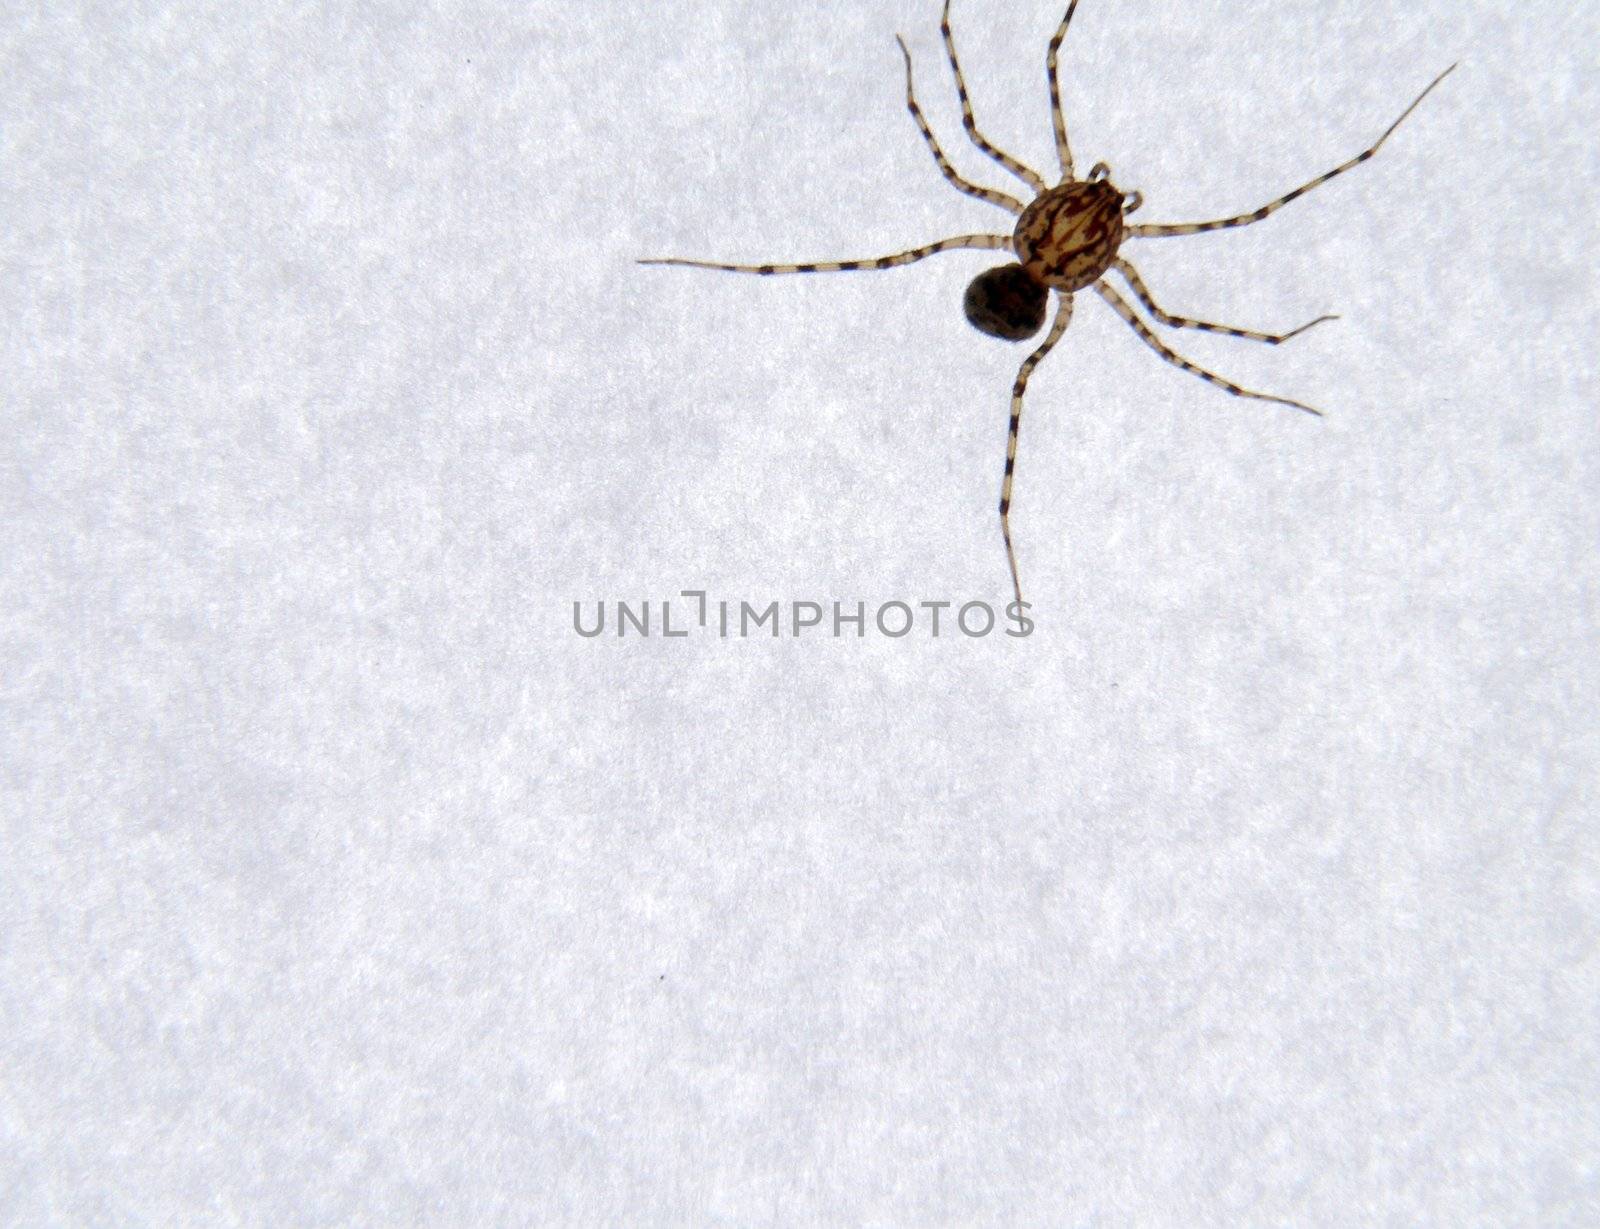 Spider on sheet by sulphur of the paper